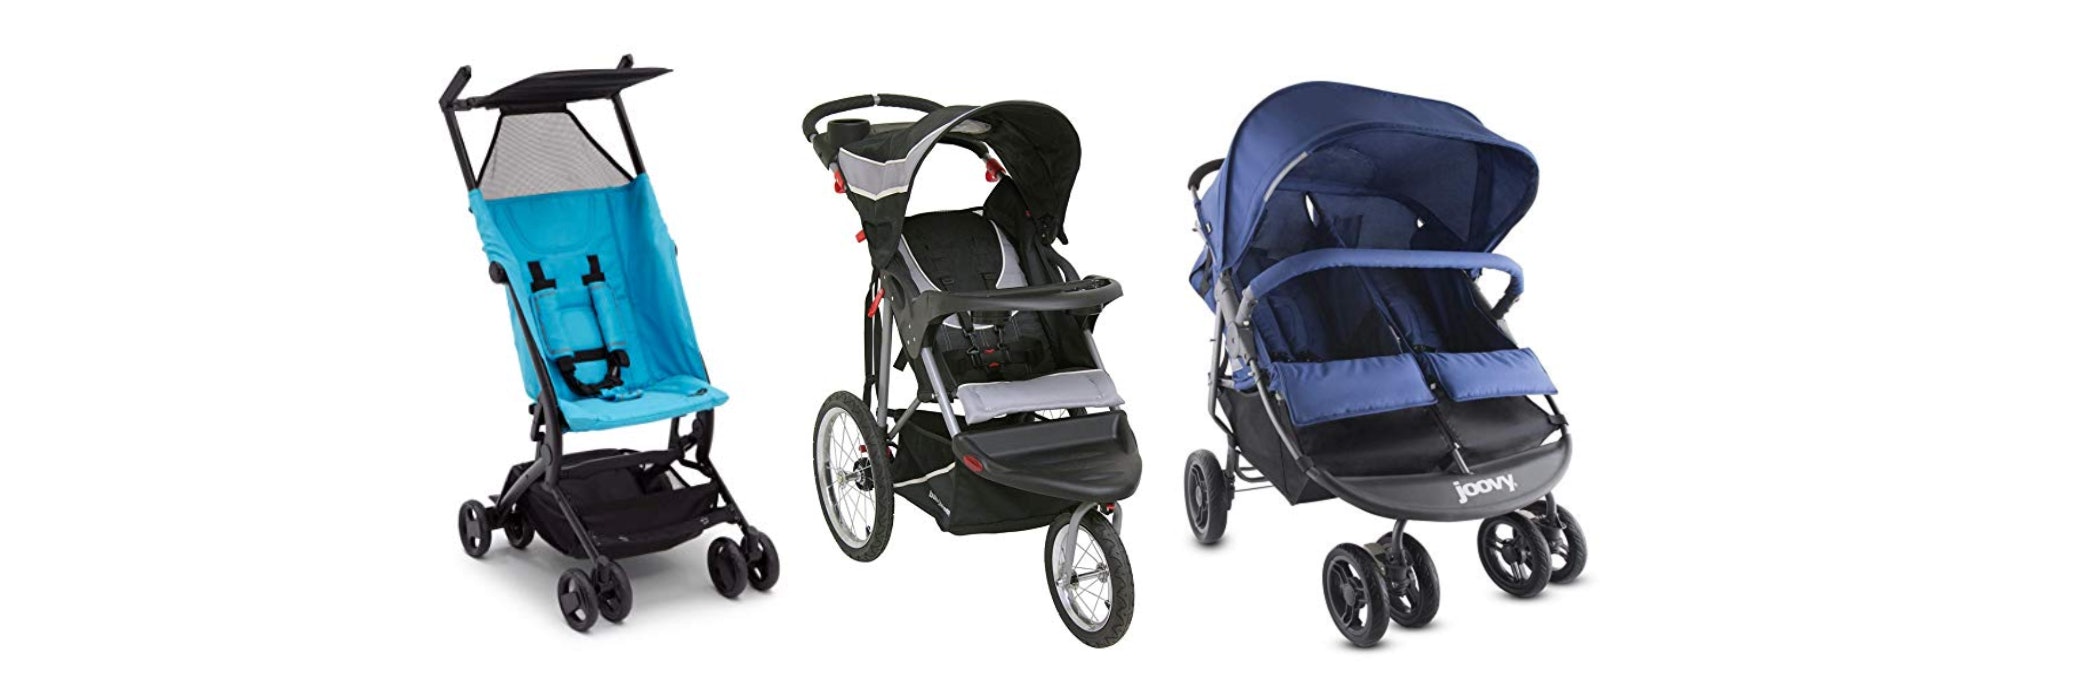 15 Best-Selling Strollers On Amazon For 